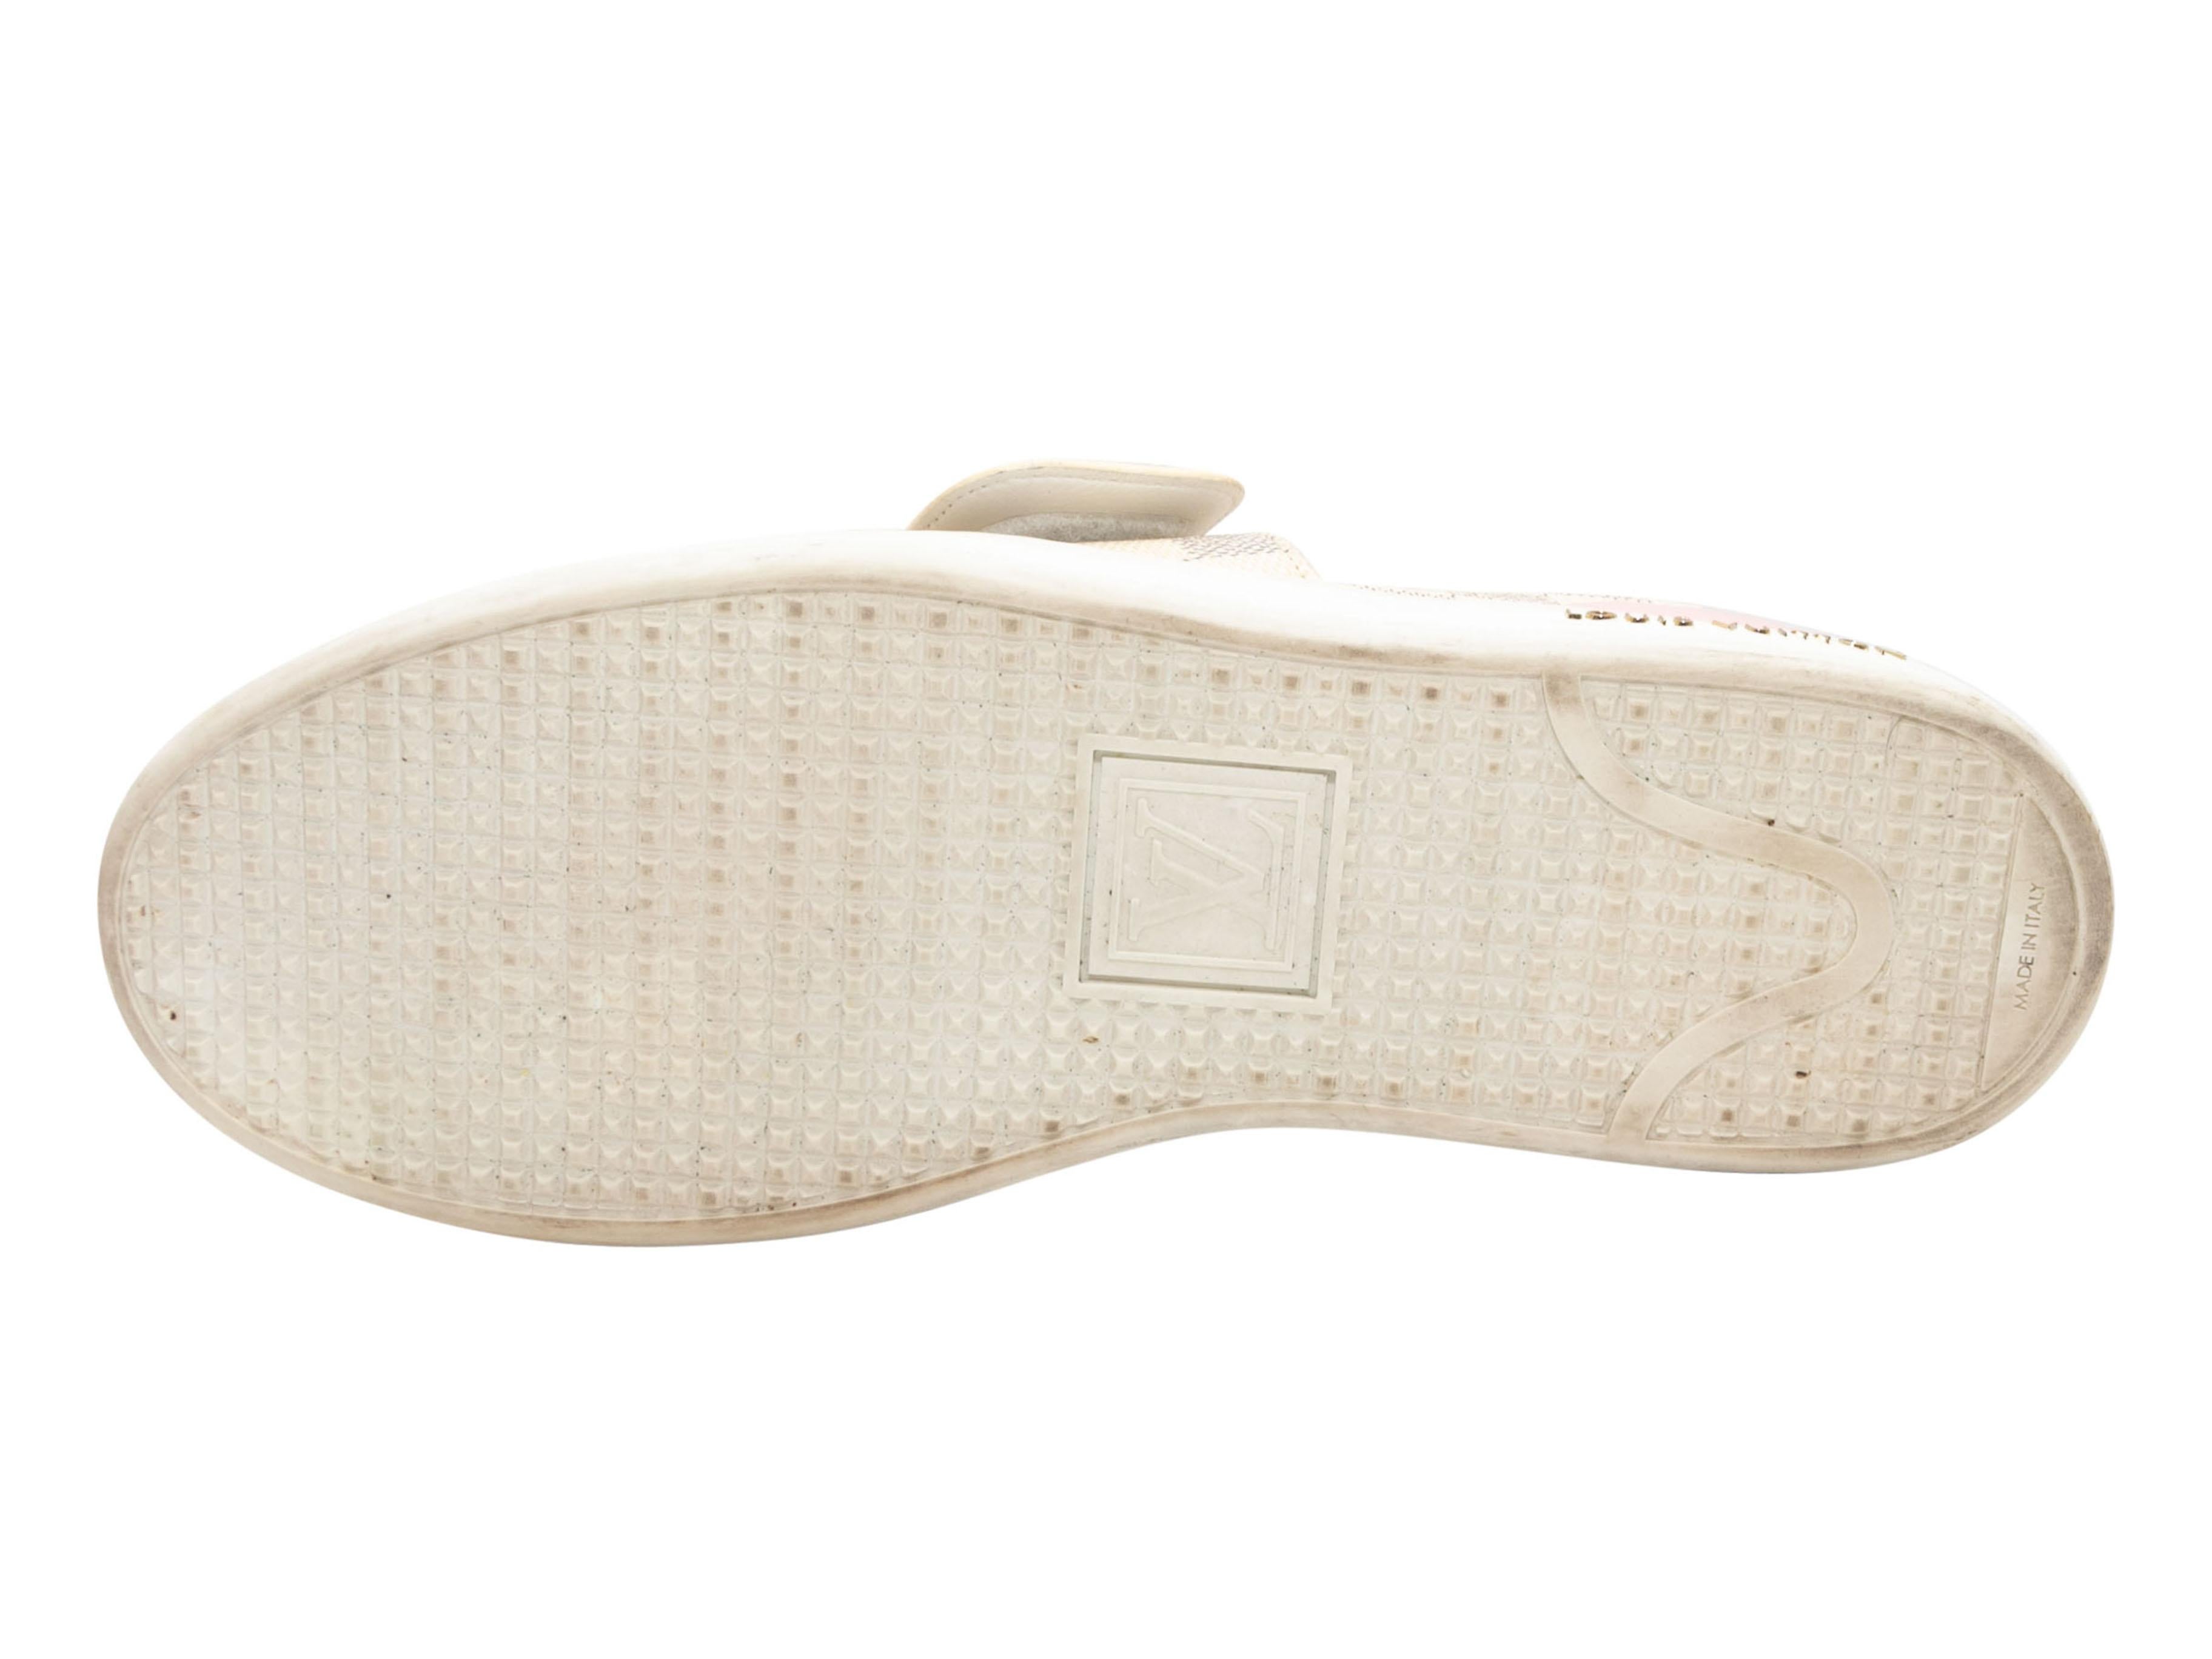 Cream and multicolor Damier Azur luggage motif low-top sneakers by Louis Vuitton. Rubber soles. Lace-up tie and strap closures at tops. 1